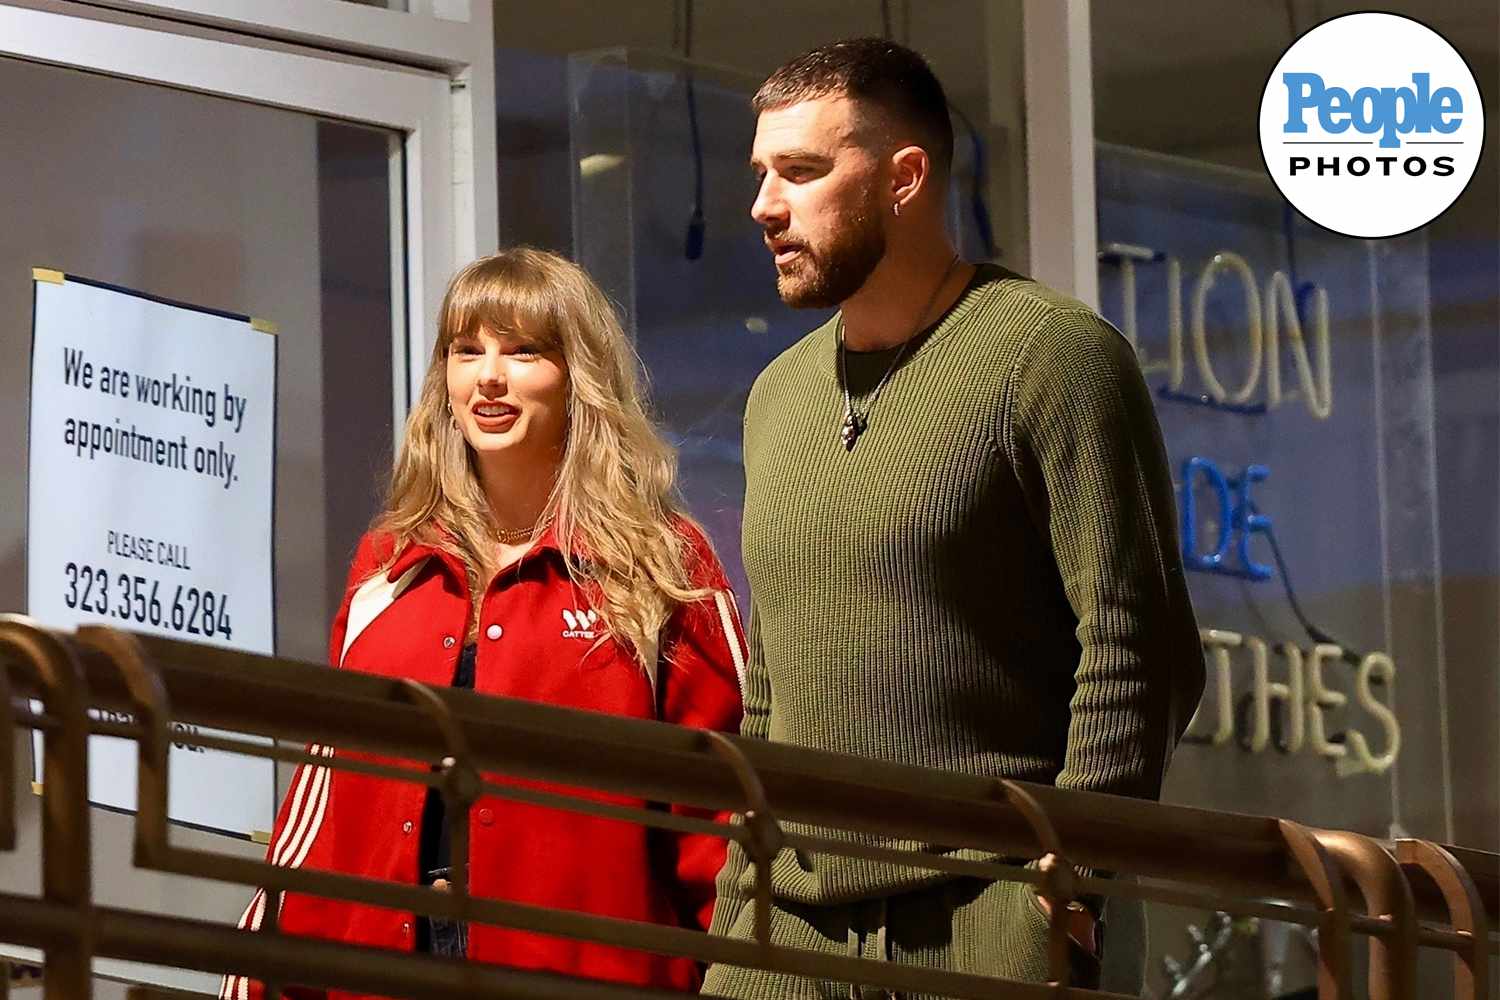 Taylor Swift and Travis Kelce are living it up in Los Angeles! ❤️ The couple were spotted holding hands during a date night at Sushi Park, as seen in photographs obtained by PEOPLE Tay is GLOWING idk how to say this well but she looks 10 years younger than she is...what the fuck is travis kelce the fountain of youth or smth?